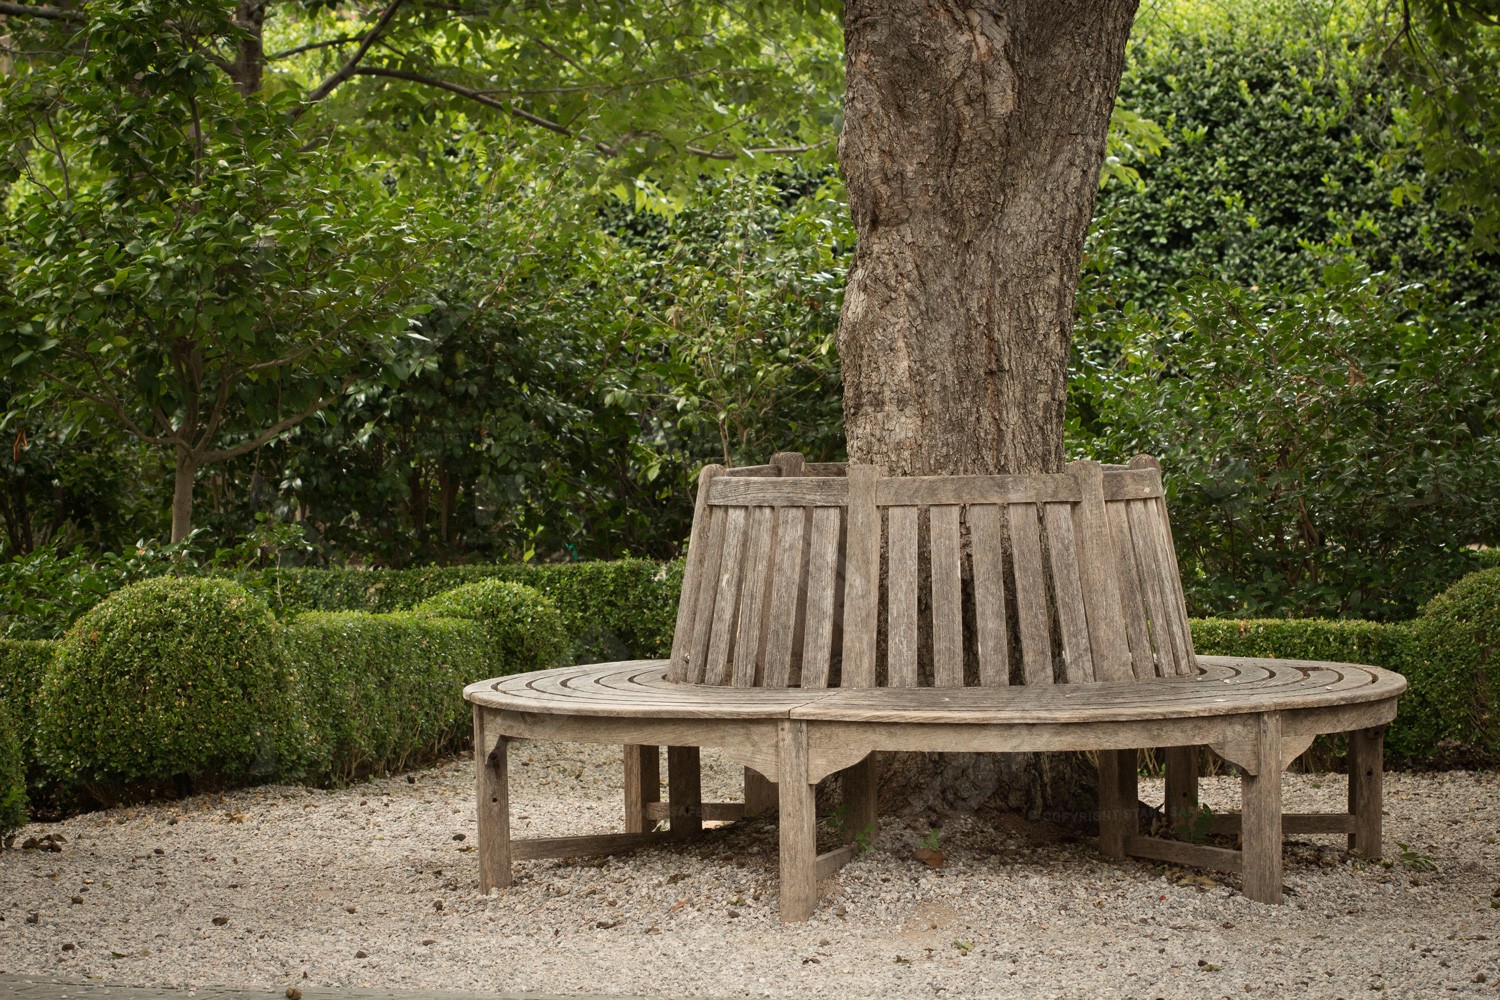 Wooden Circular Tree Bench Positioned Under Tree needing Frequent Maintenance